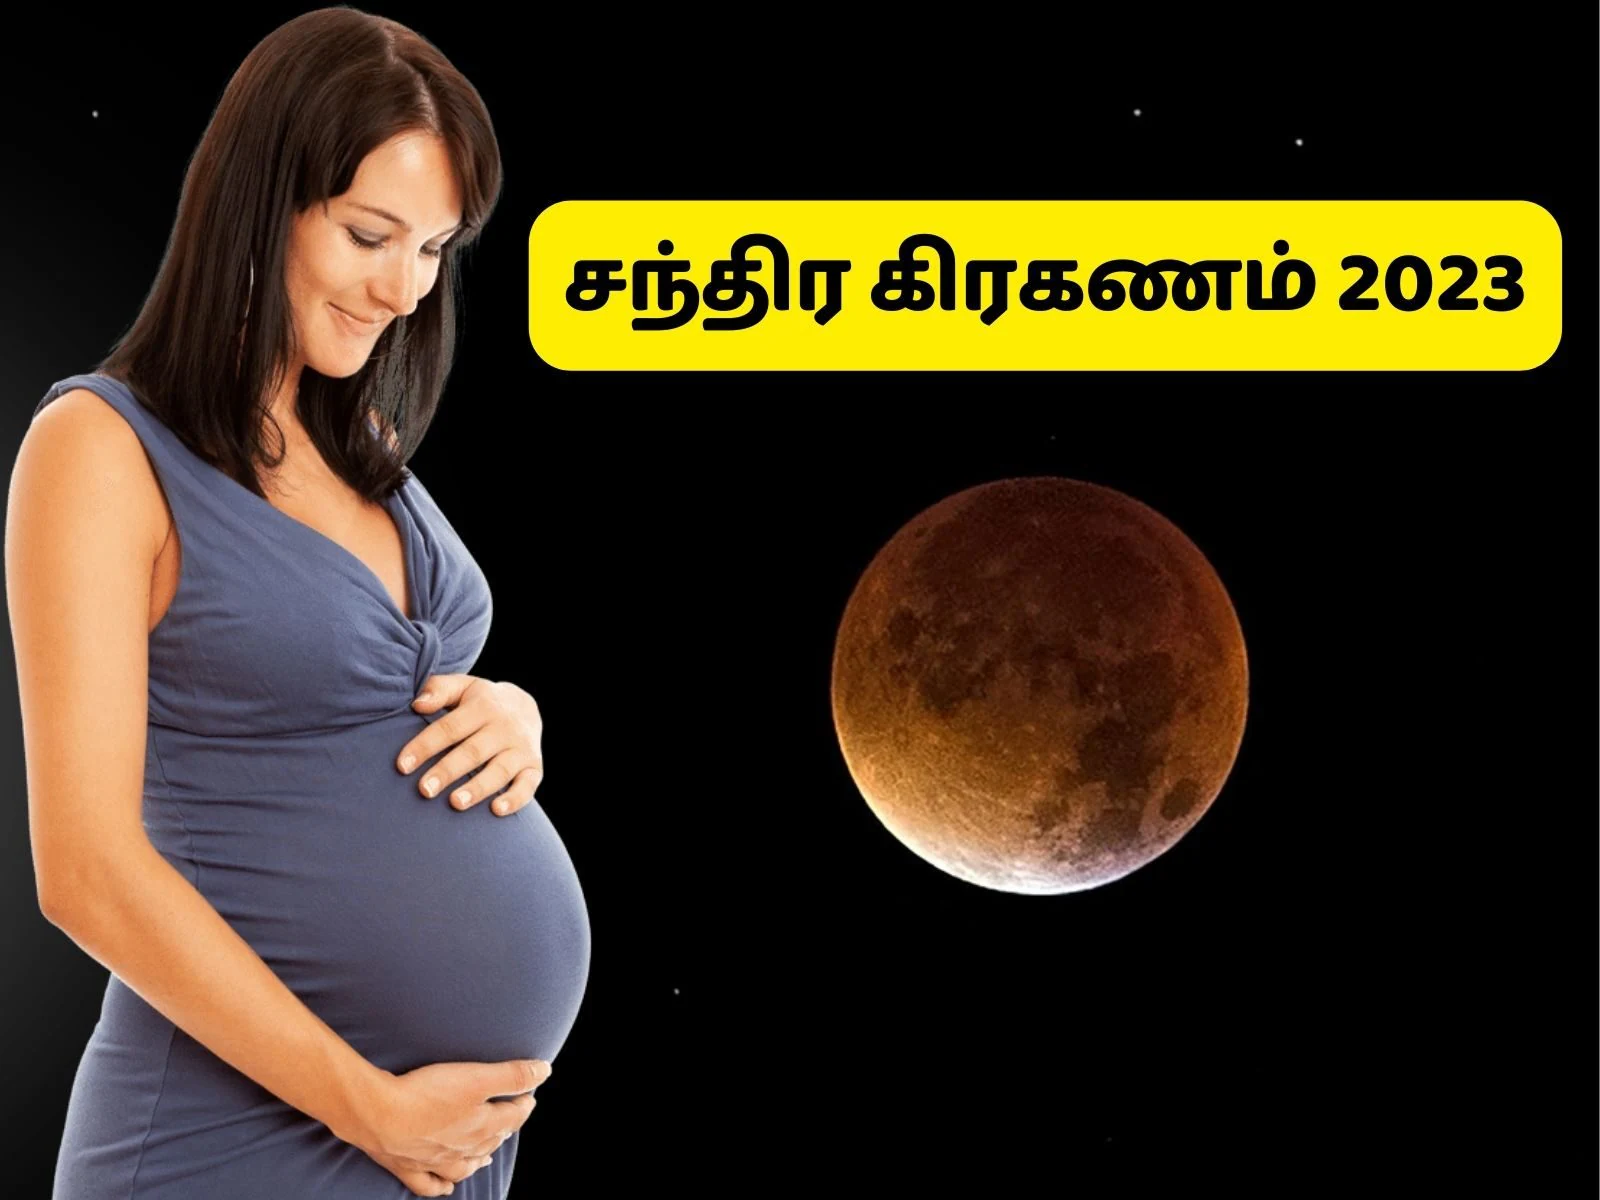 Lunar eclipse today What should pregnant women do and not do